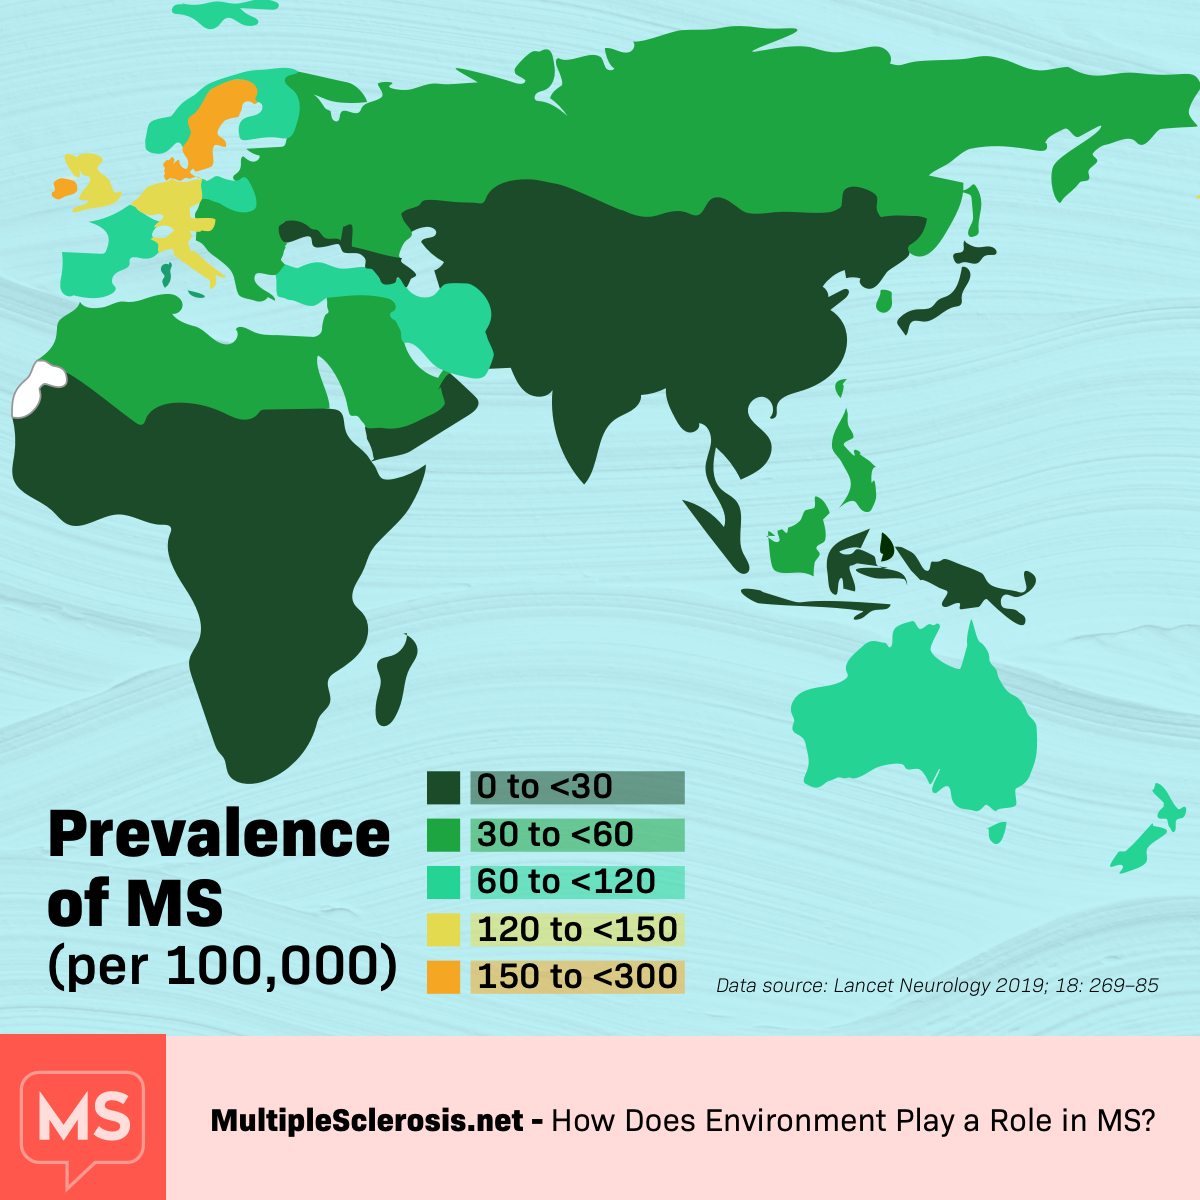 -Map of Africa, Europe and Asia showing the prevalence of MS per 100,000.